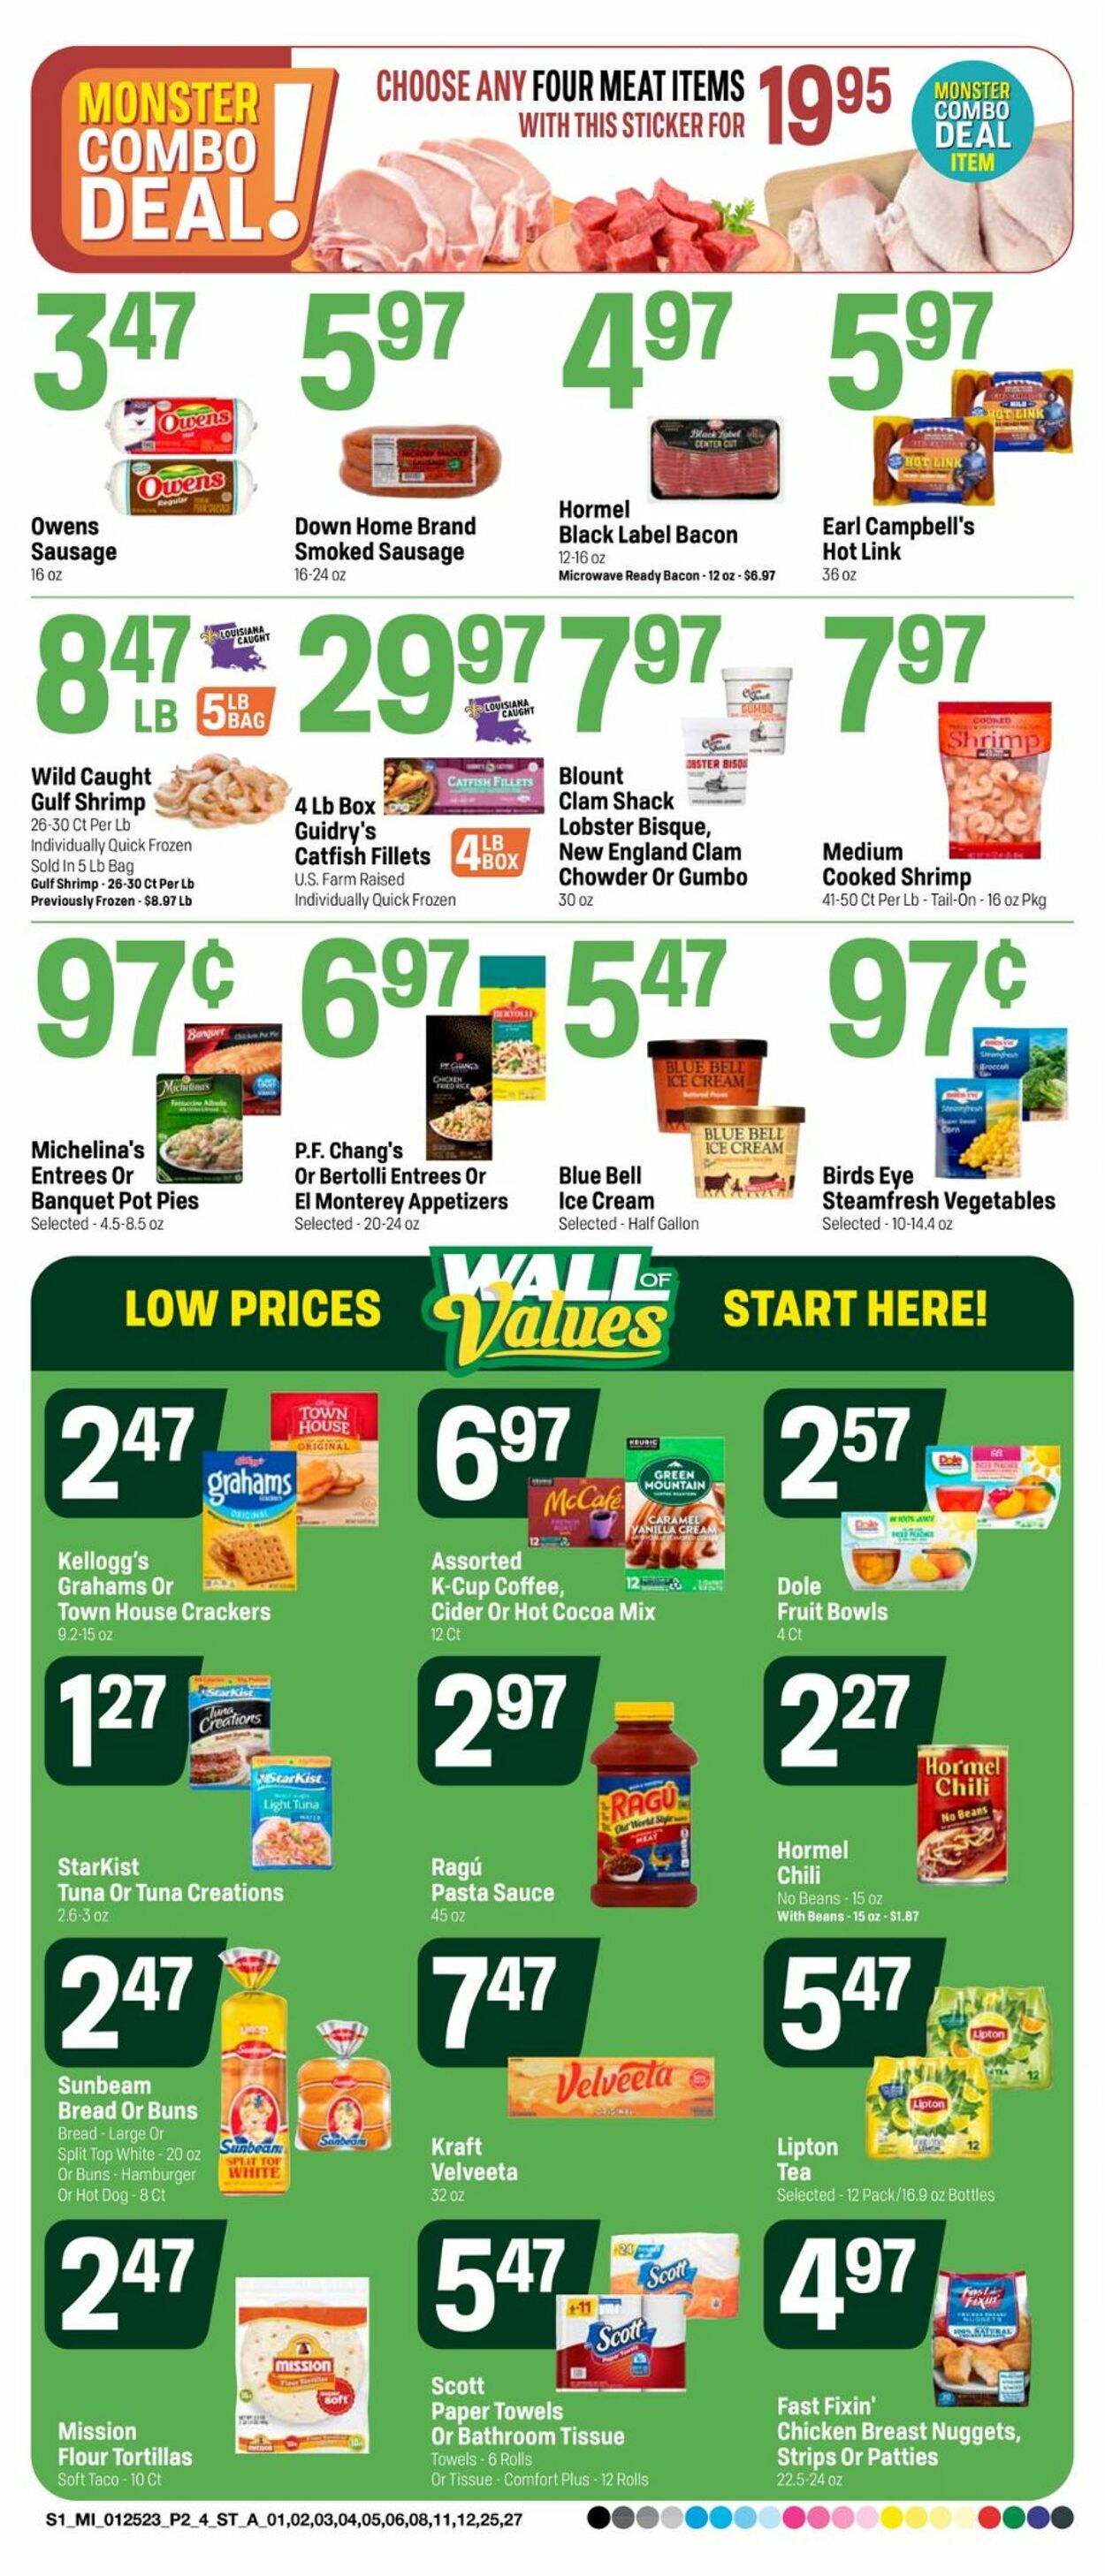 Catalogue Super 1 Foods from 01/25/2023